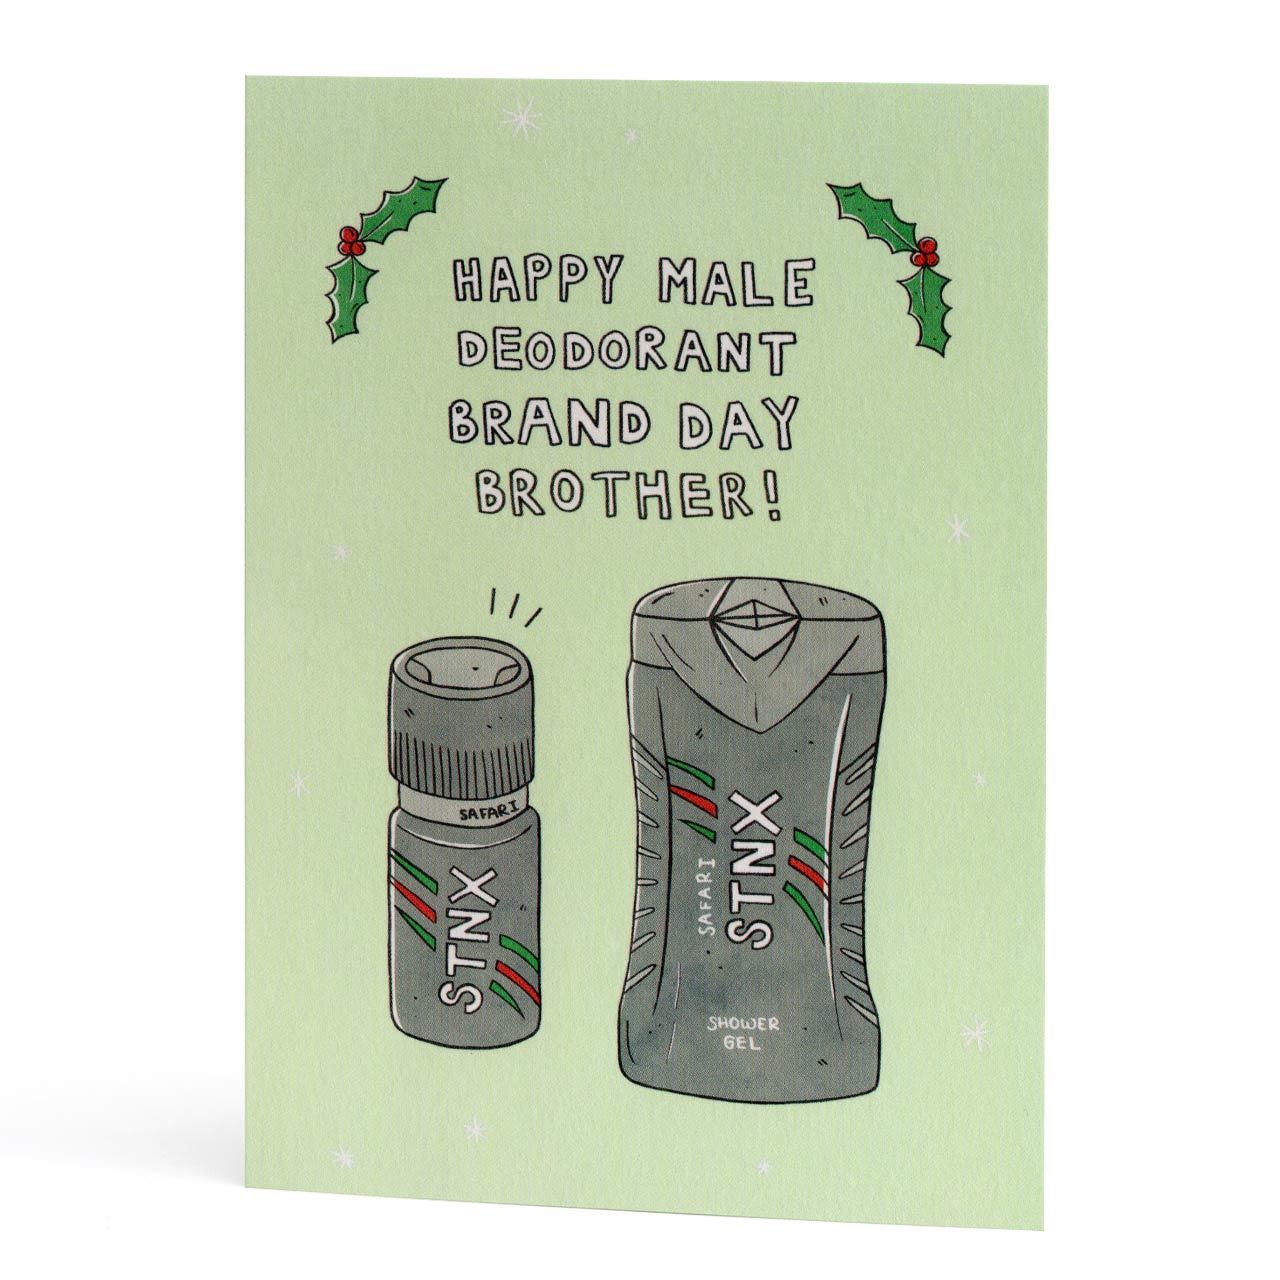 Male Deodorant Brand Day Brother Christmas Card